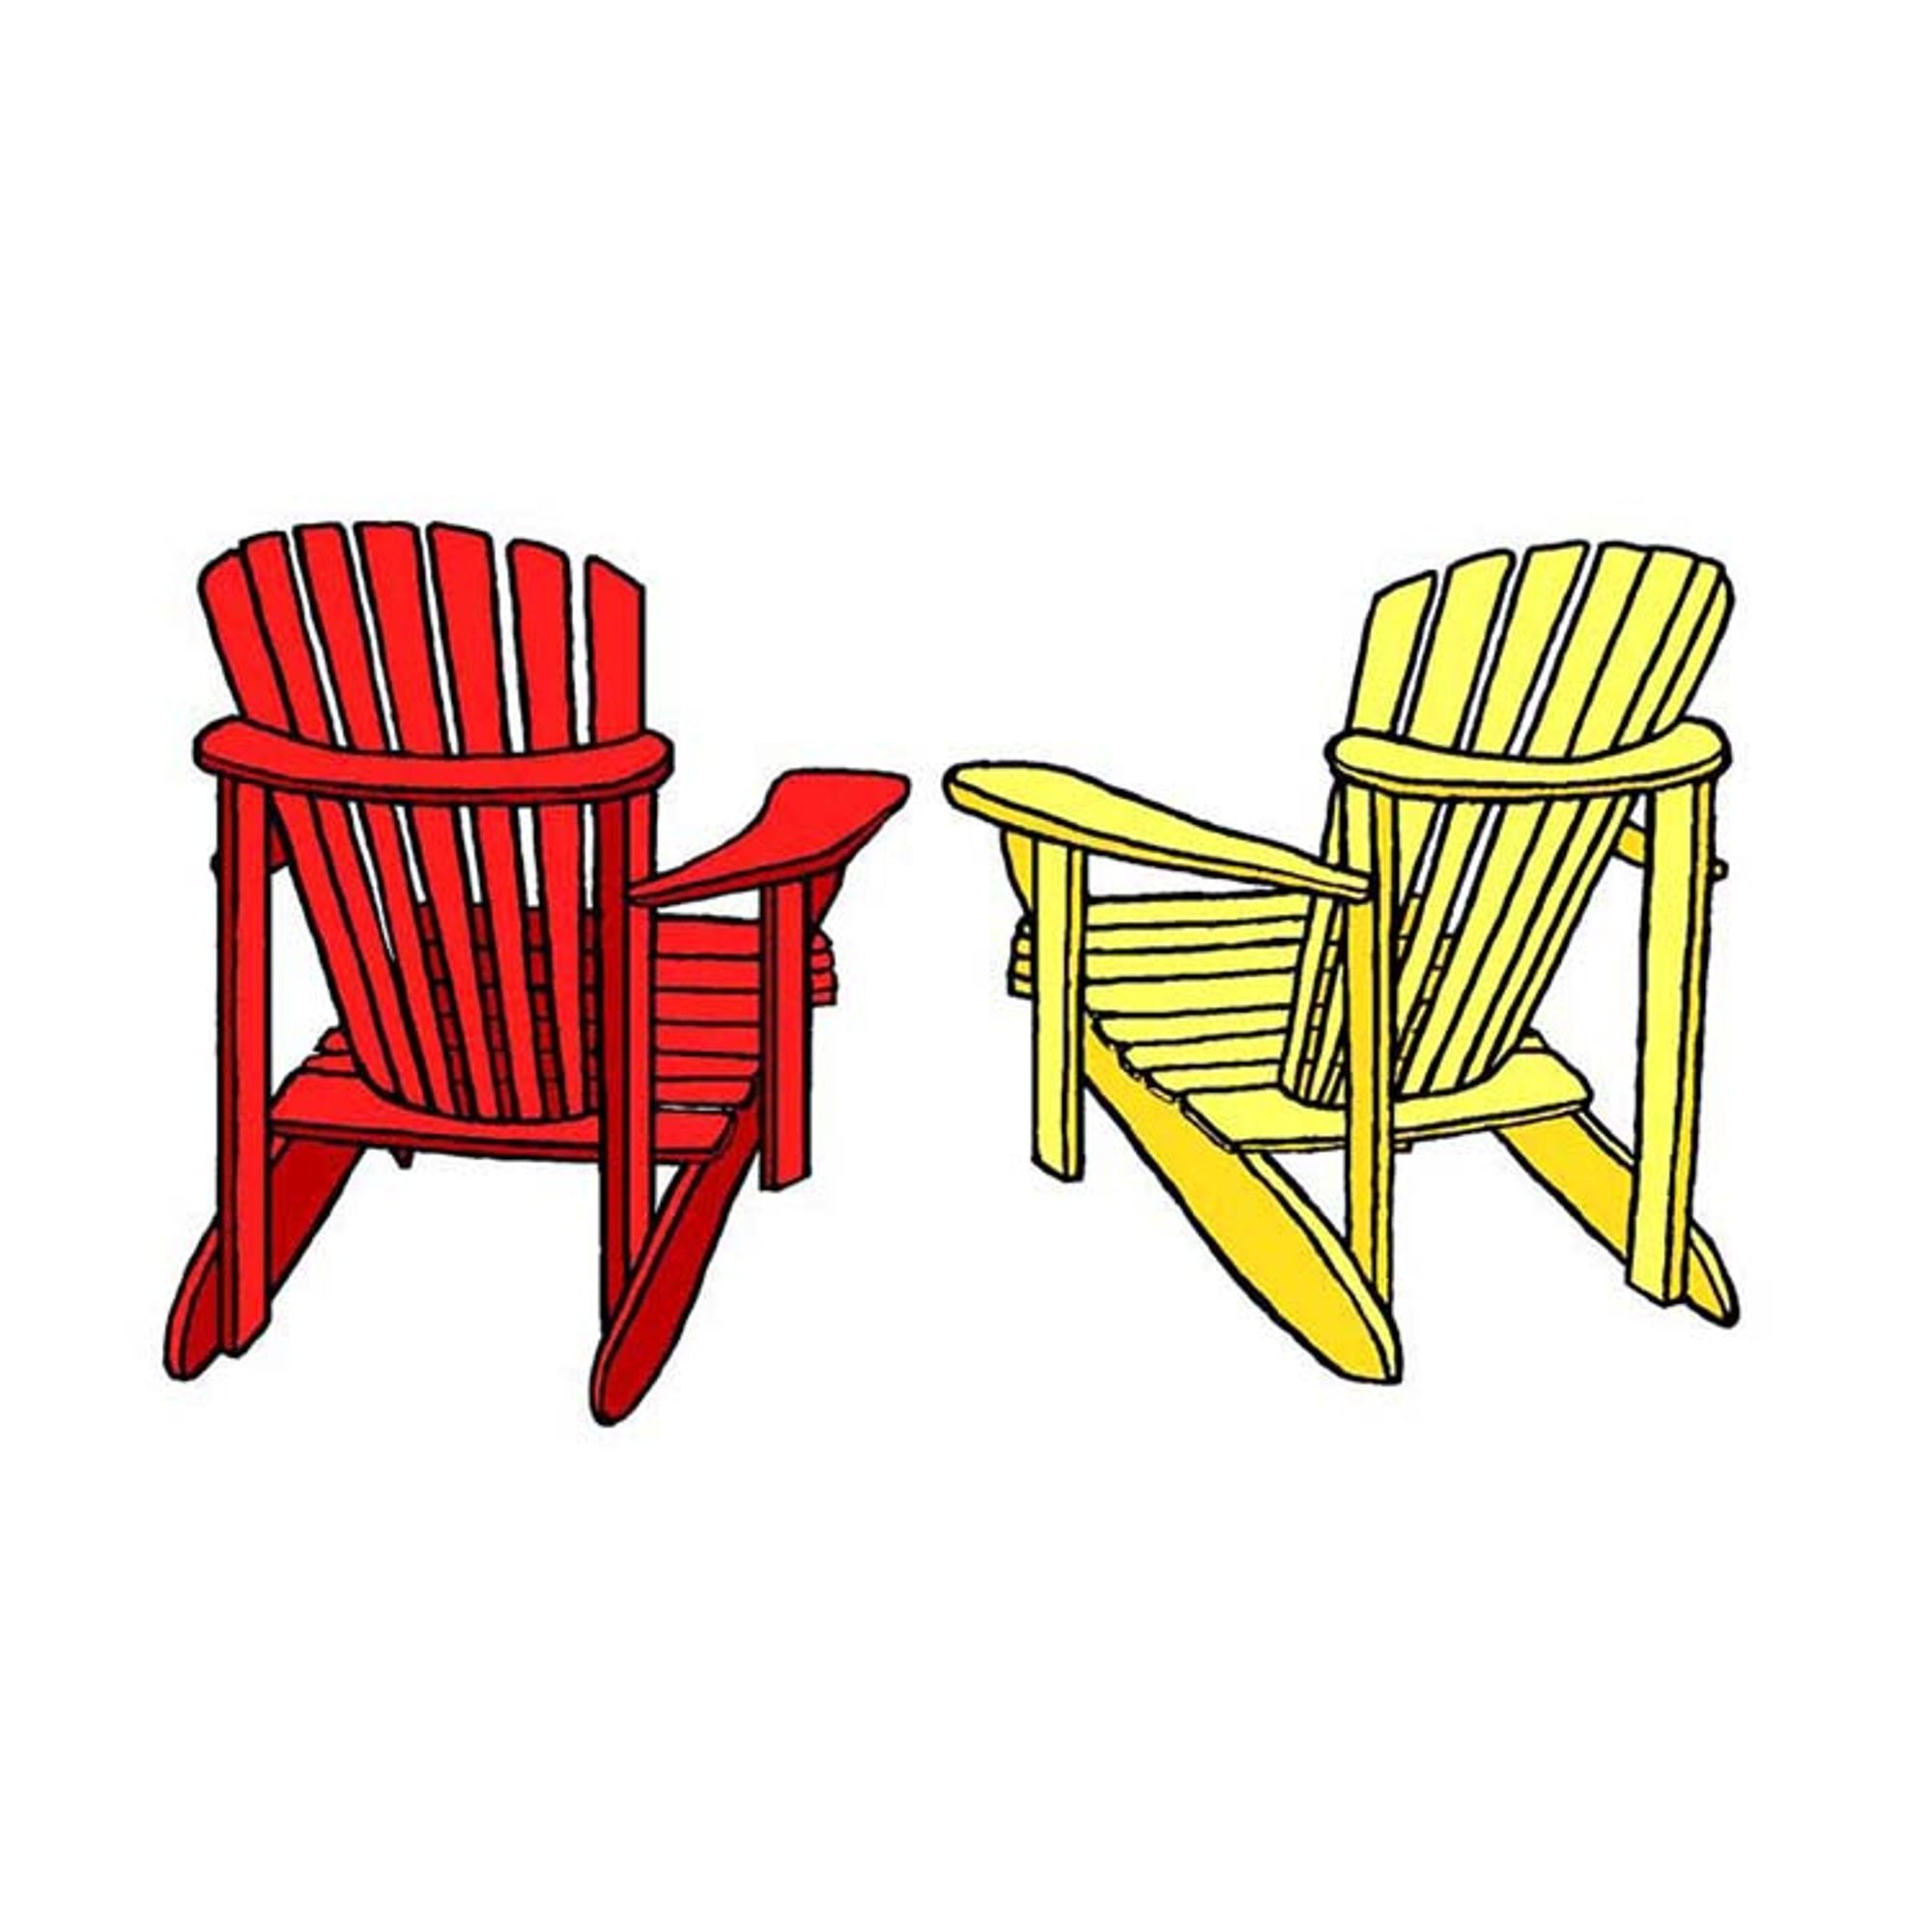 Frog's Whiskers Ink Stamp - Muskoka Chairs